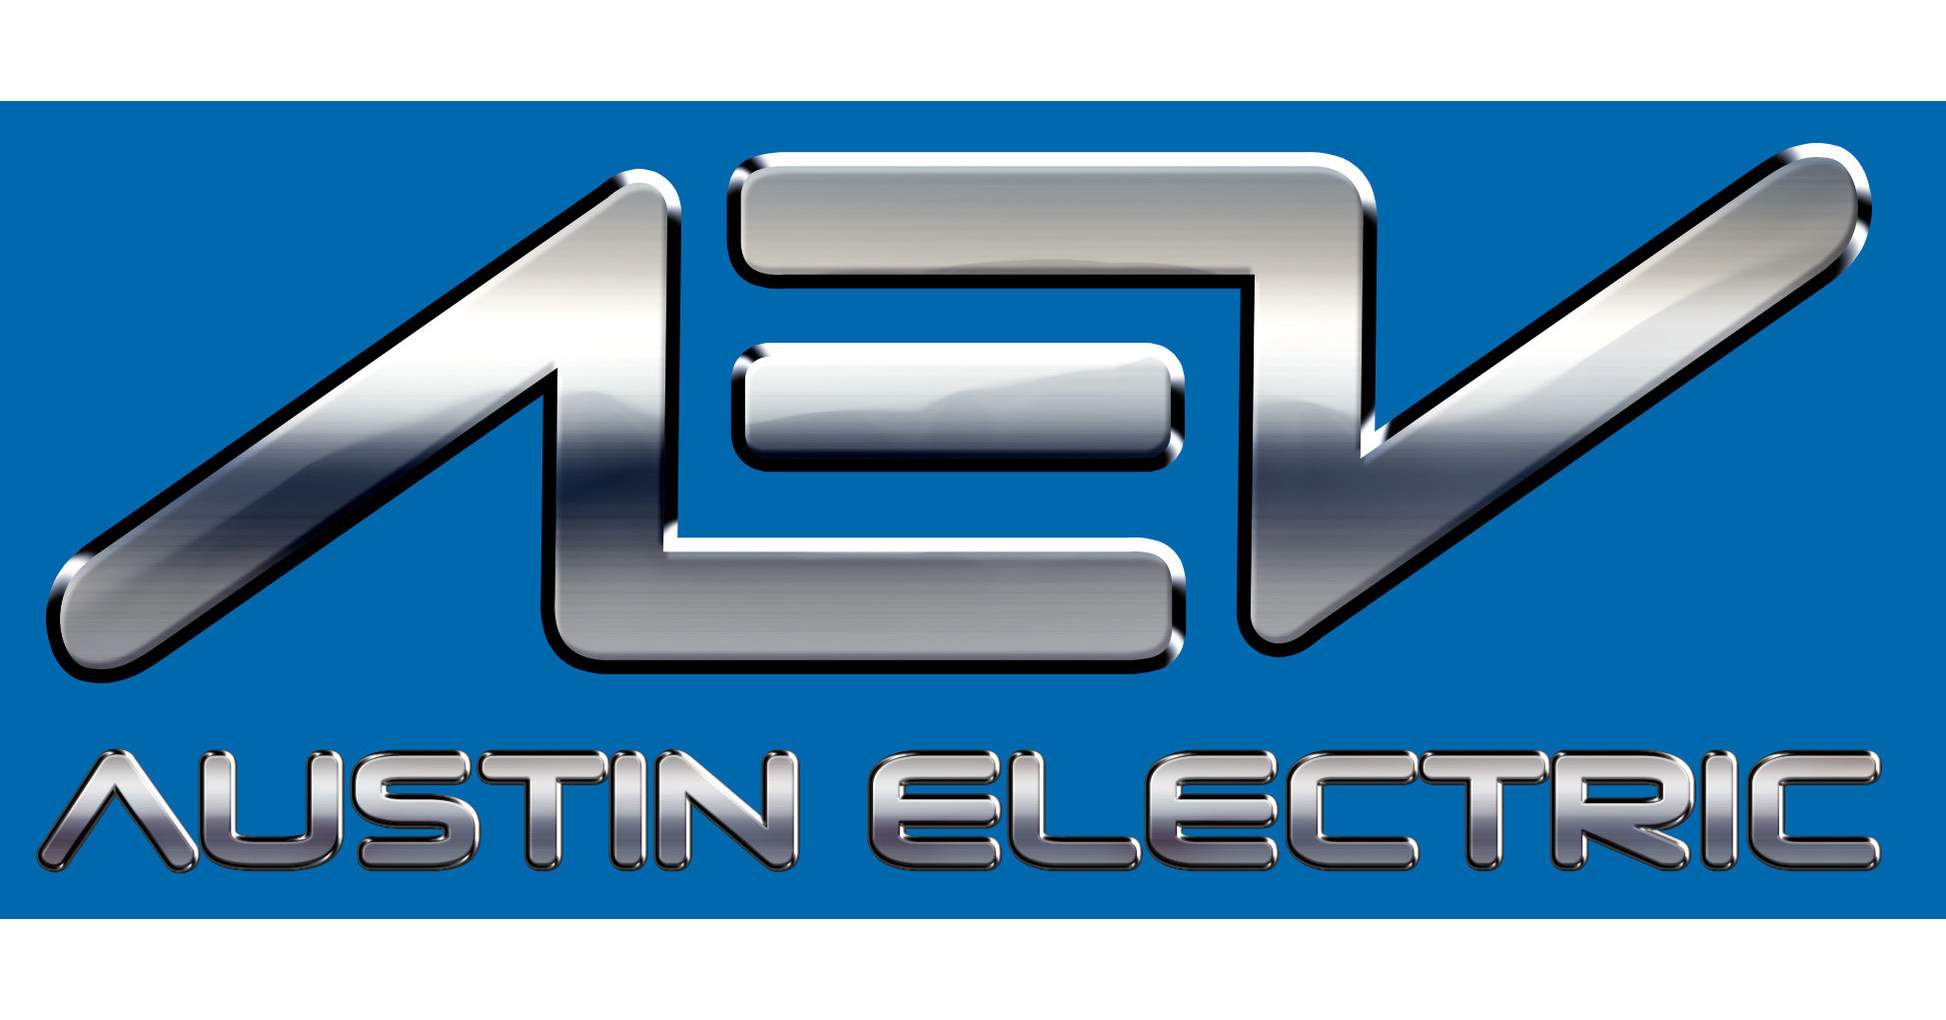 Austin Electric Vehicles Forms Strategic Partnership With Circuit of